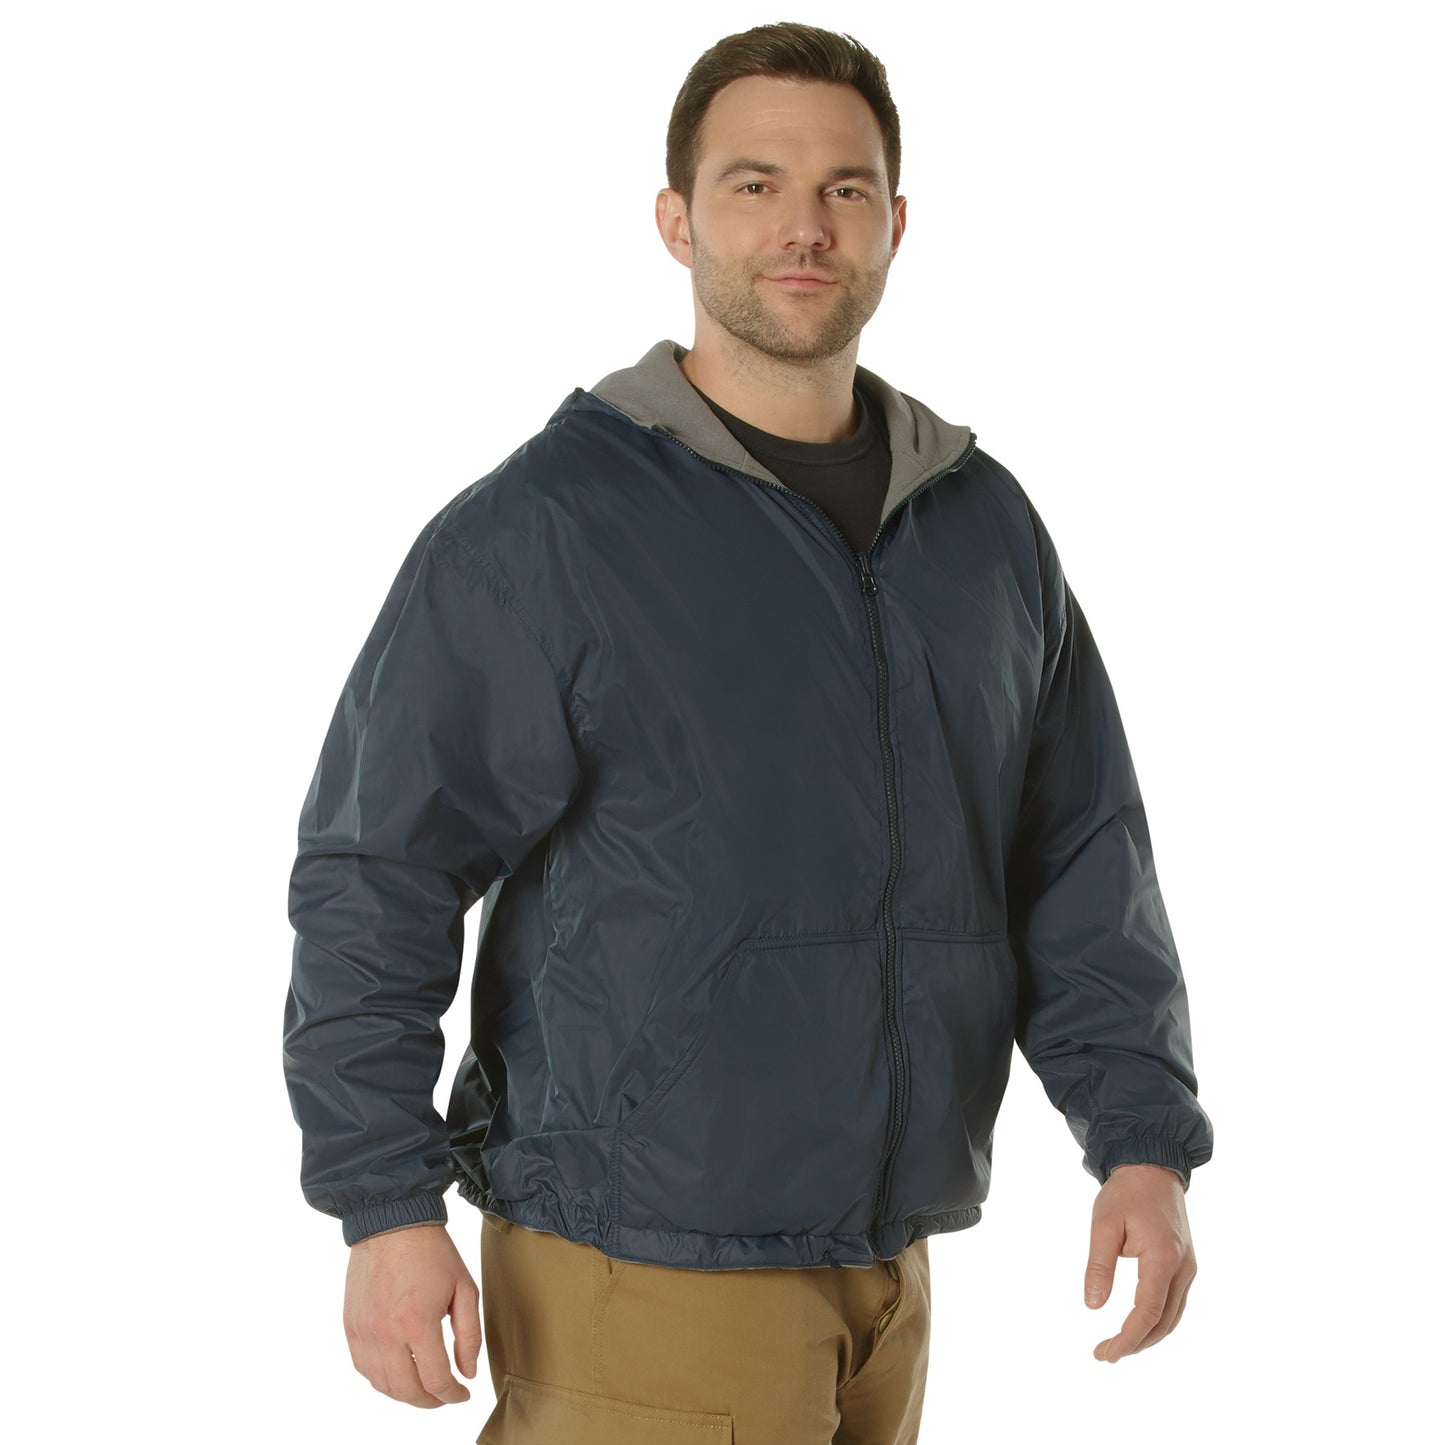 Rothco Reversible Lined Jacket With Hood